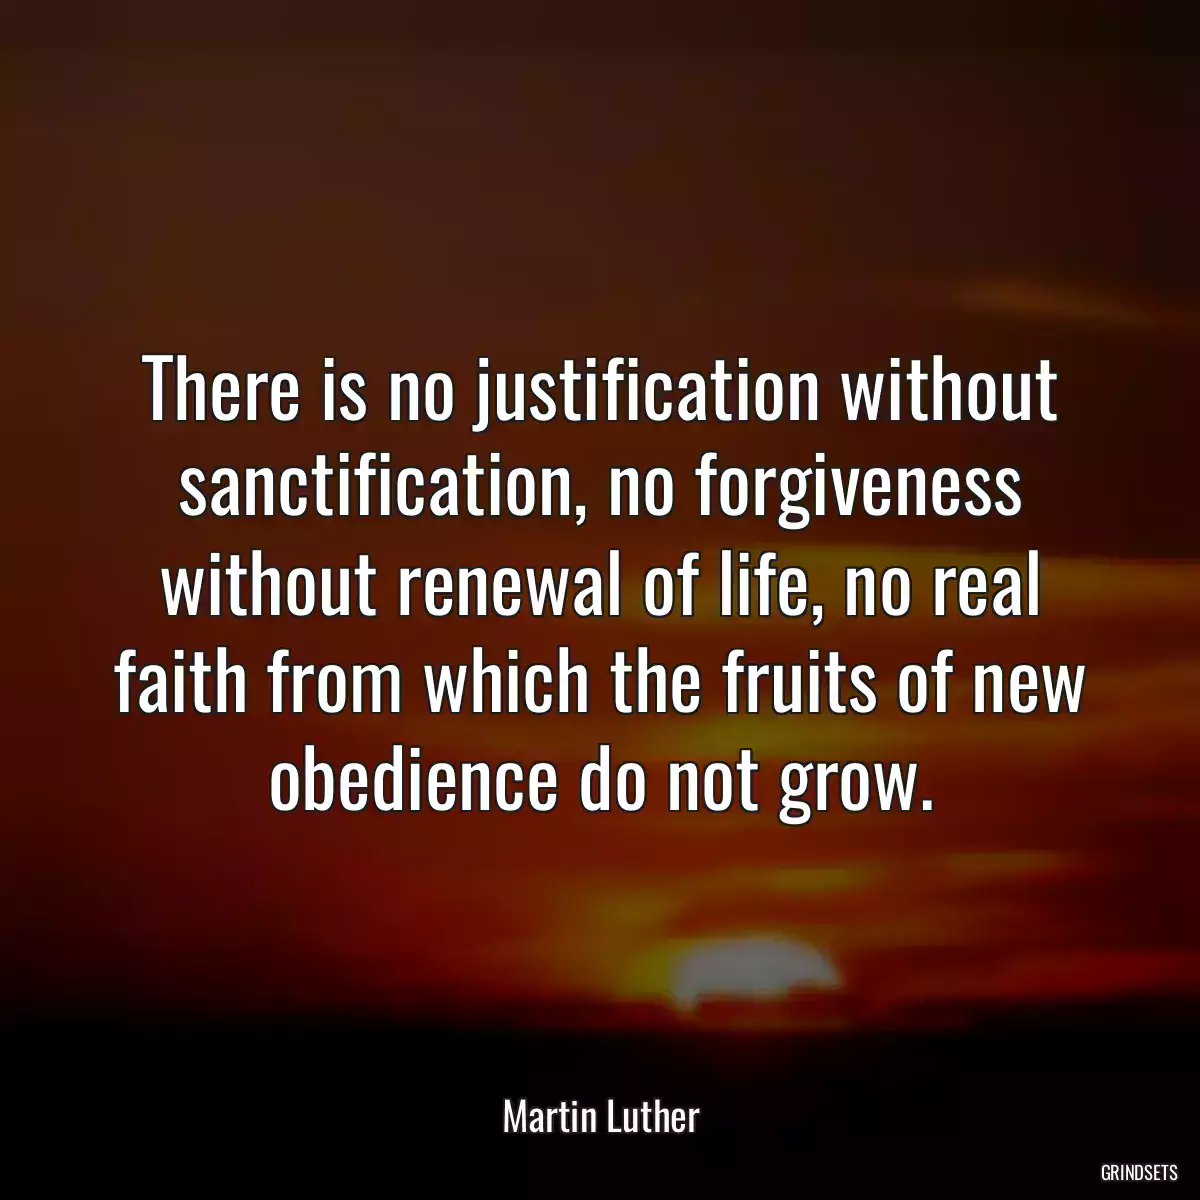 There is no justification without sanctification, no forgiveness without renewal of life, no real faith from which the fruits of new obedience do not grow.